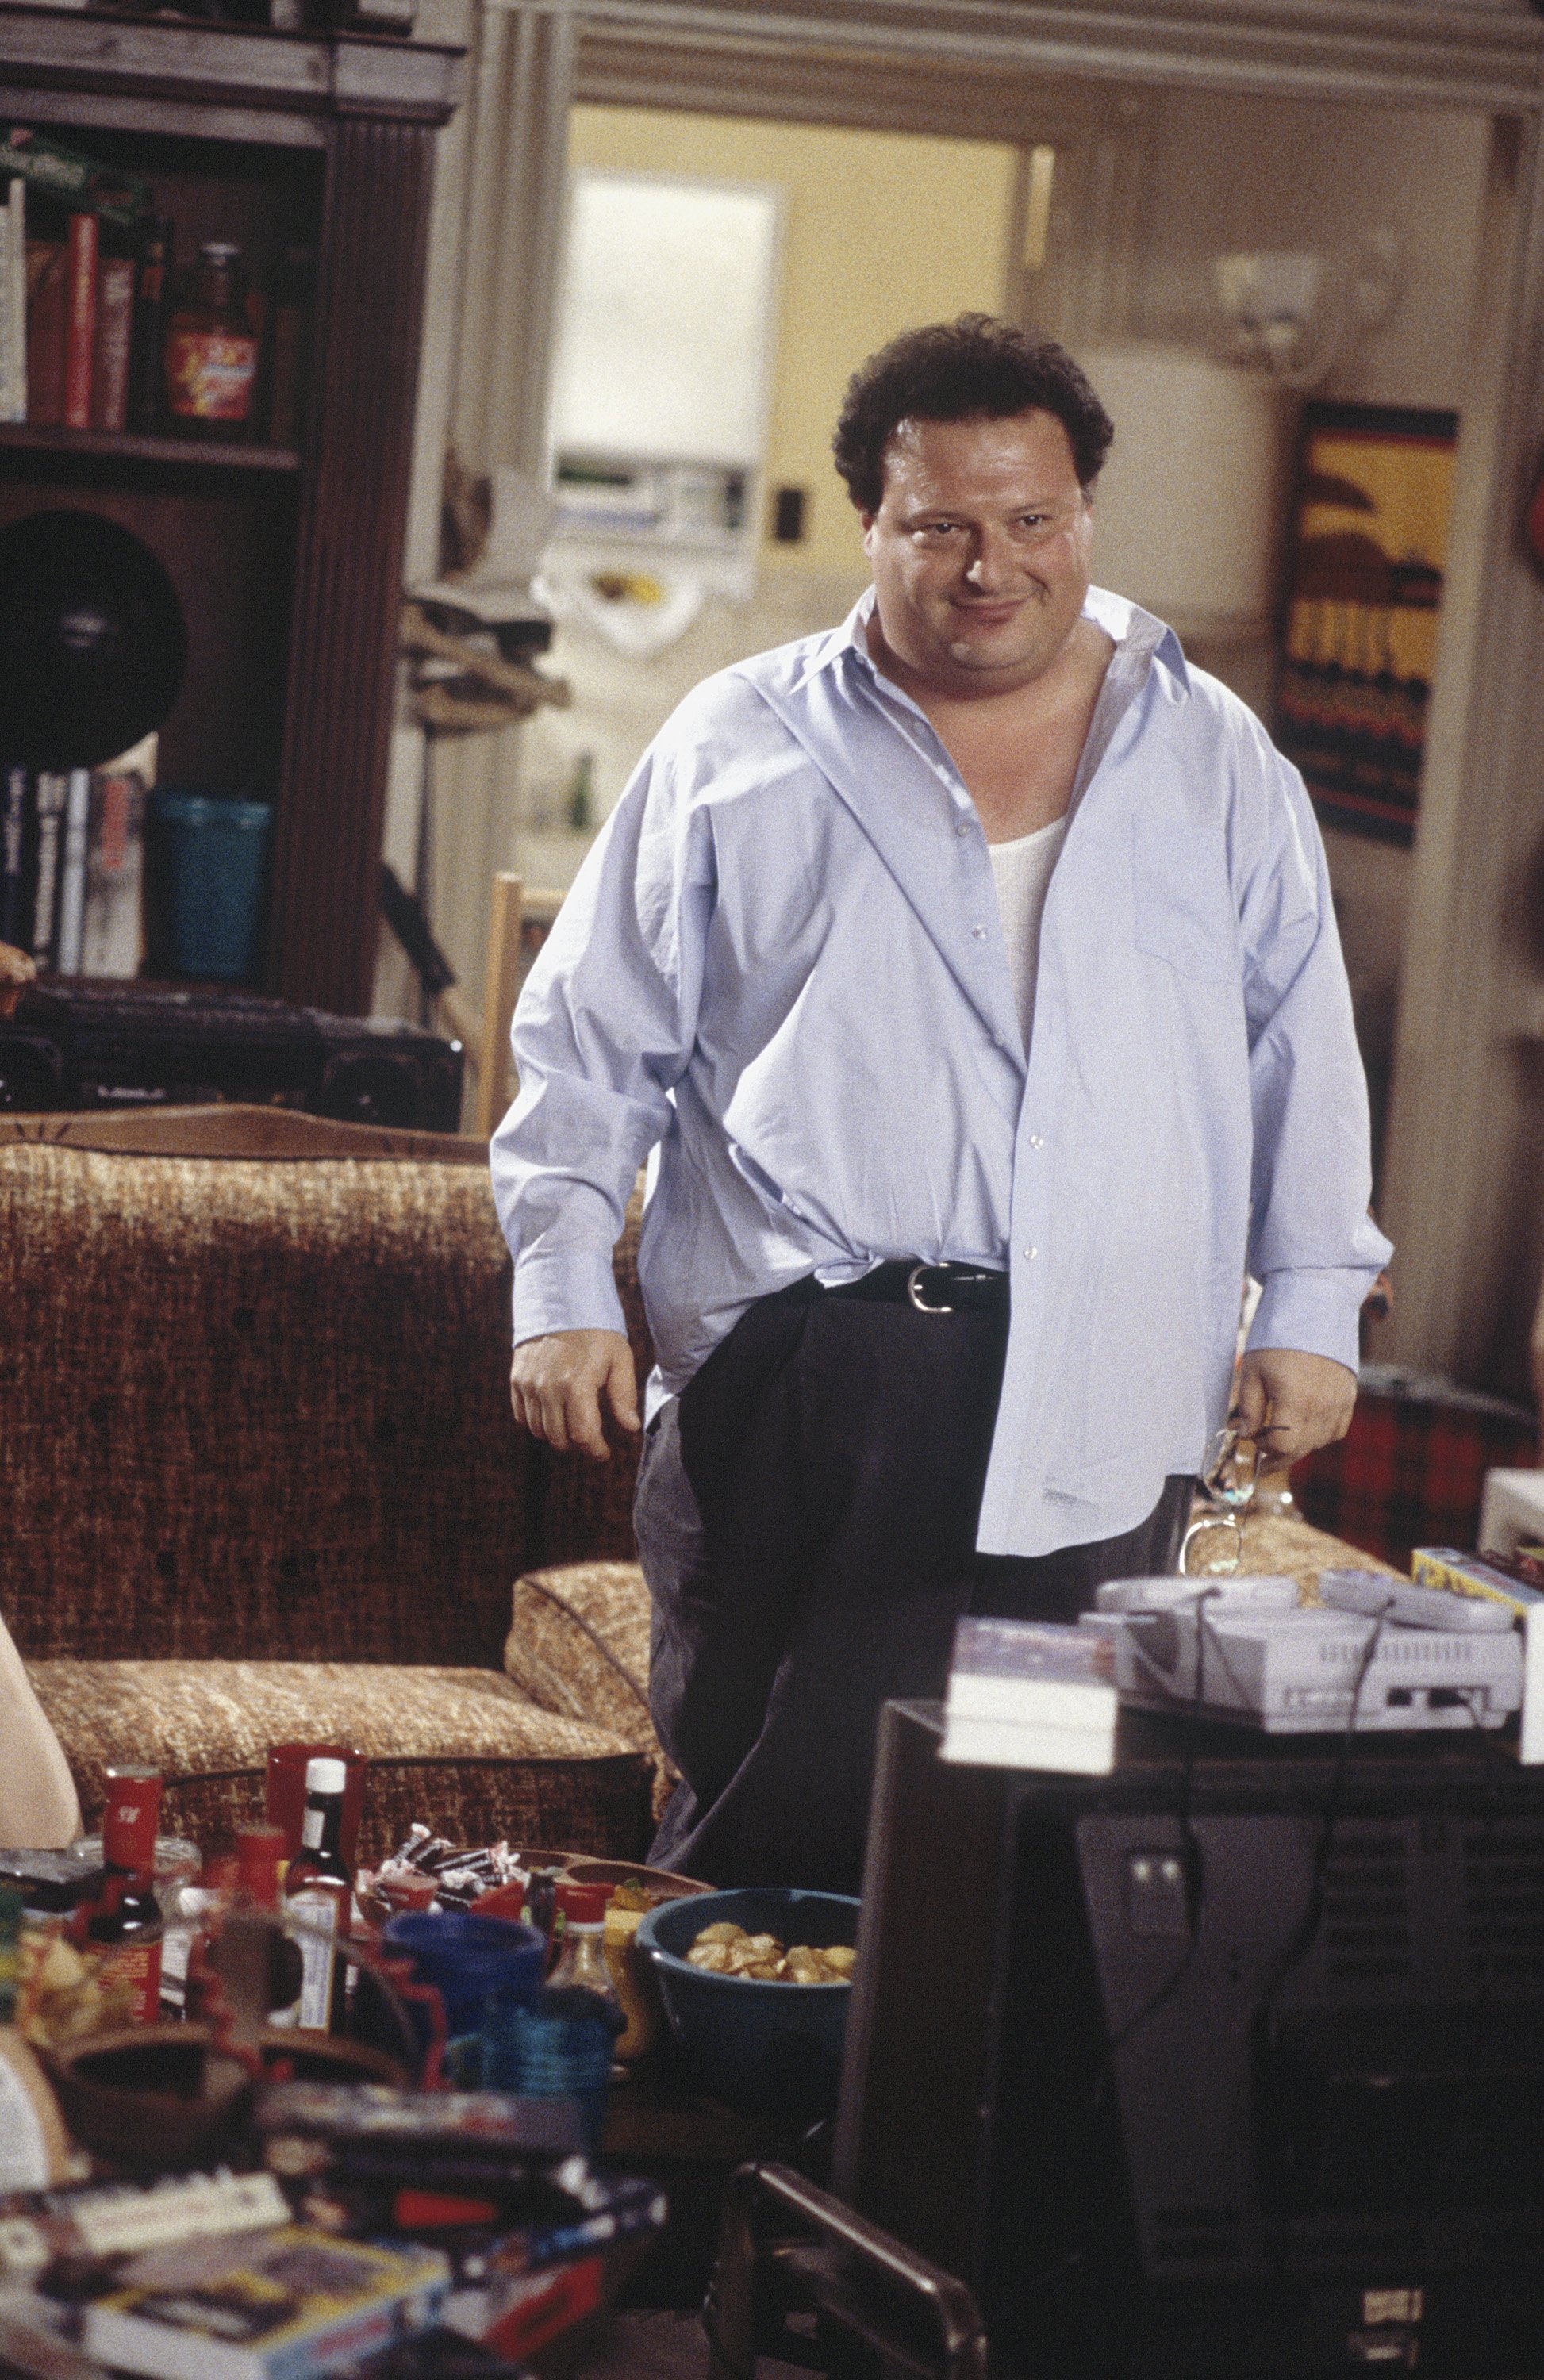 Wayne Knight as Newman in the 1989 sitcom "Seinfeld". | Source: Getty Images